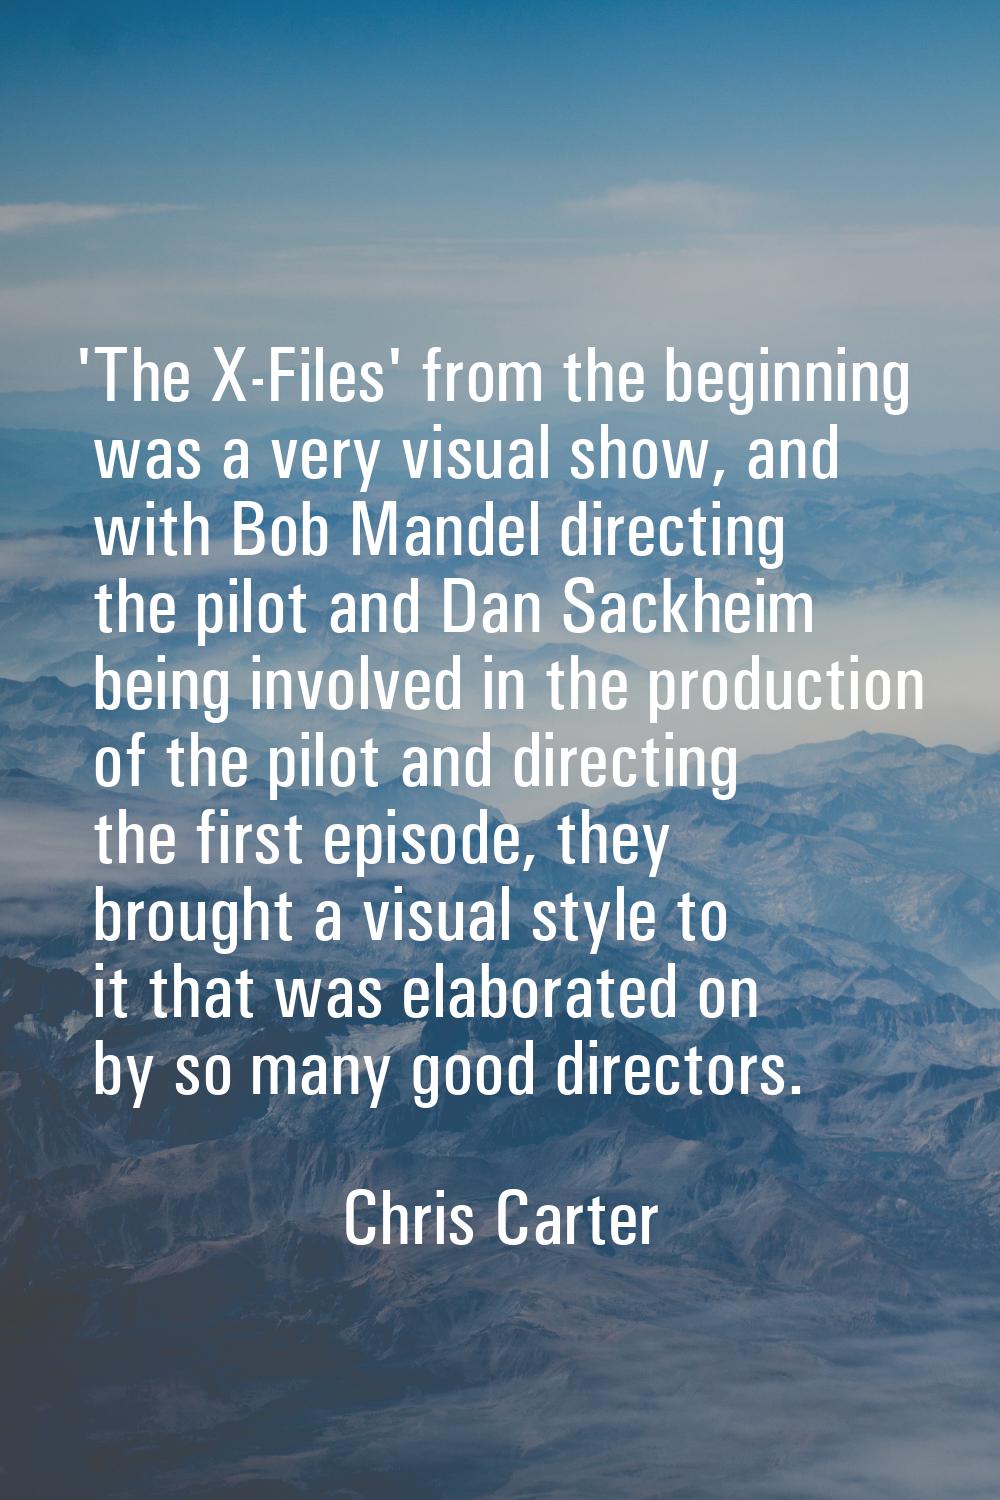 'The X-Files' from the beginning was a very visual show, and with Bob Mandel directing the pilot an